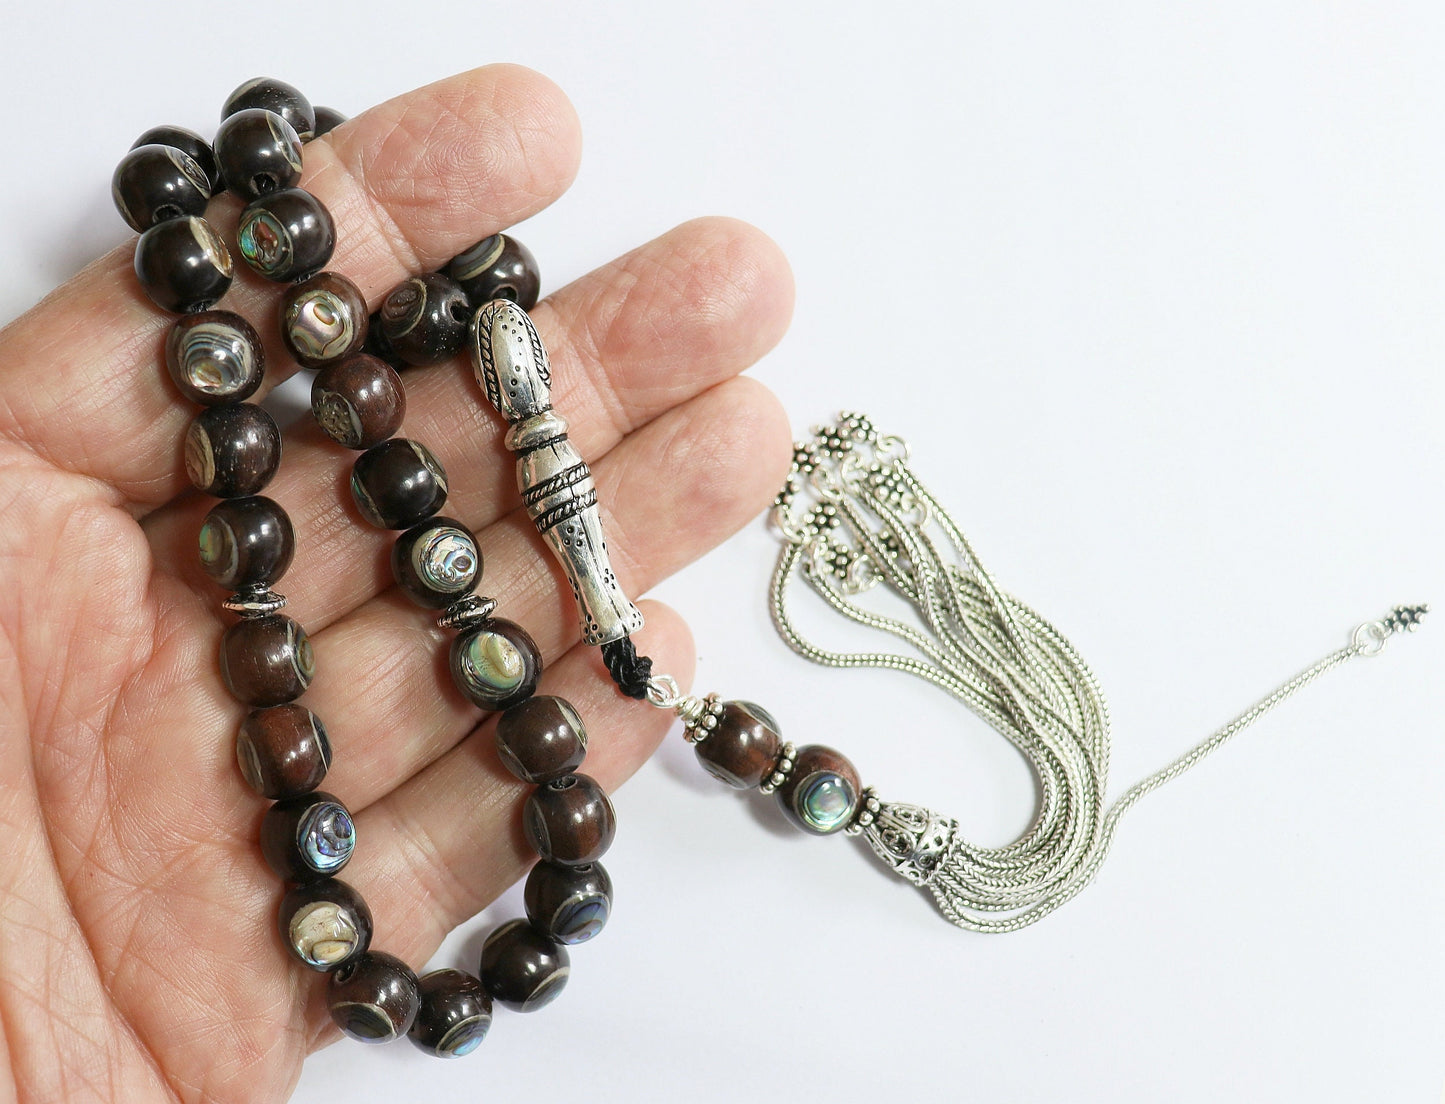 Tesbih Prayer Worry Beads Ebony Inlaid with Paua Shell - Sterling Silver - Unique Collector's XXR